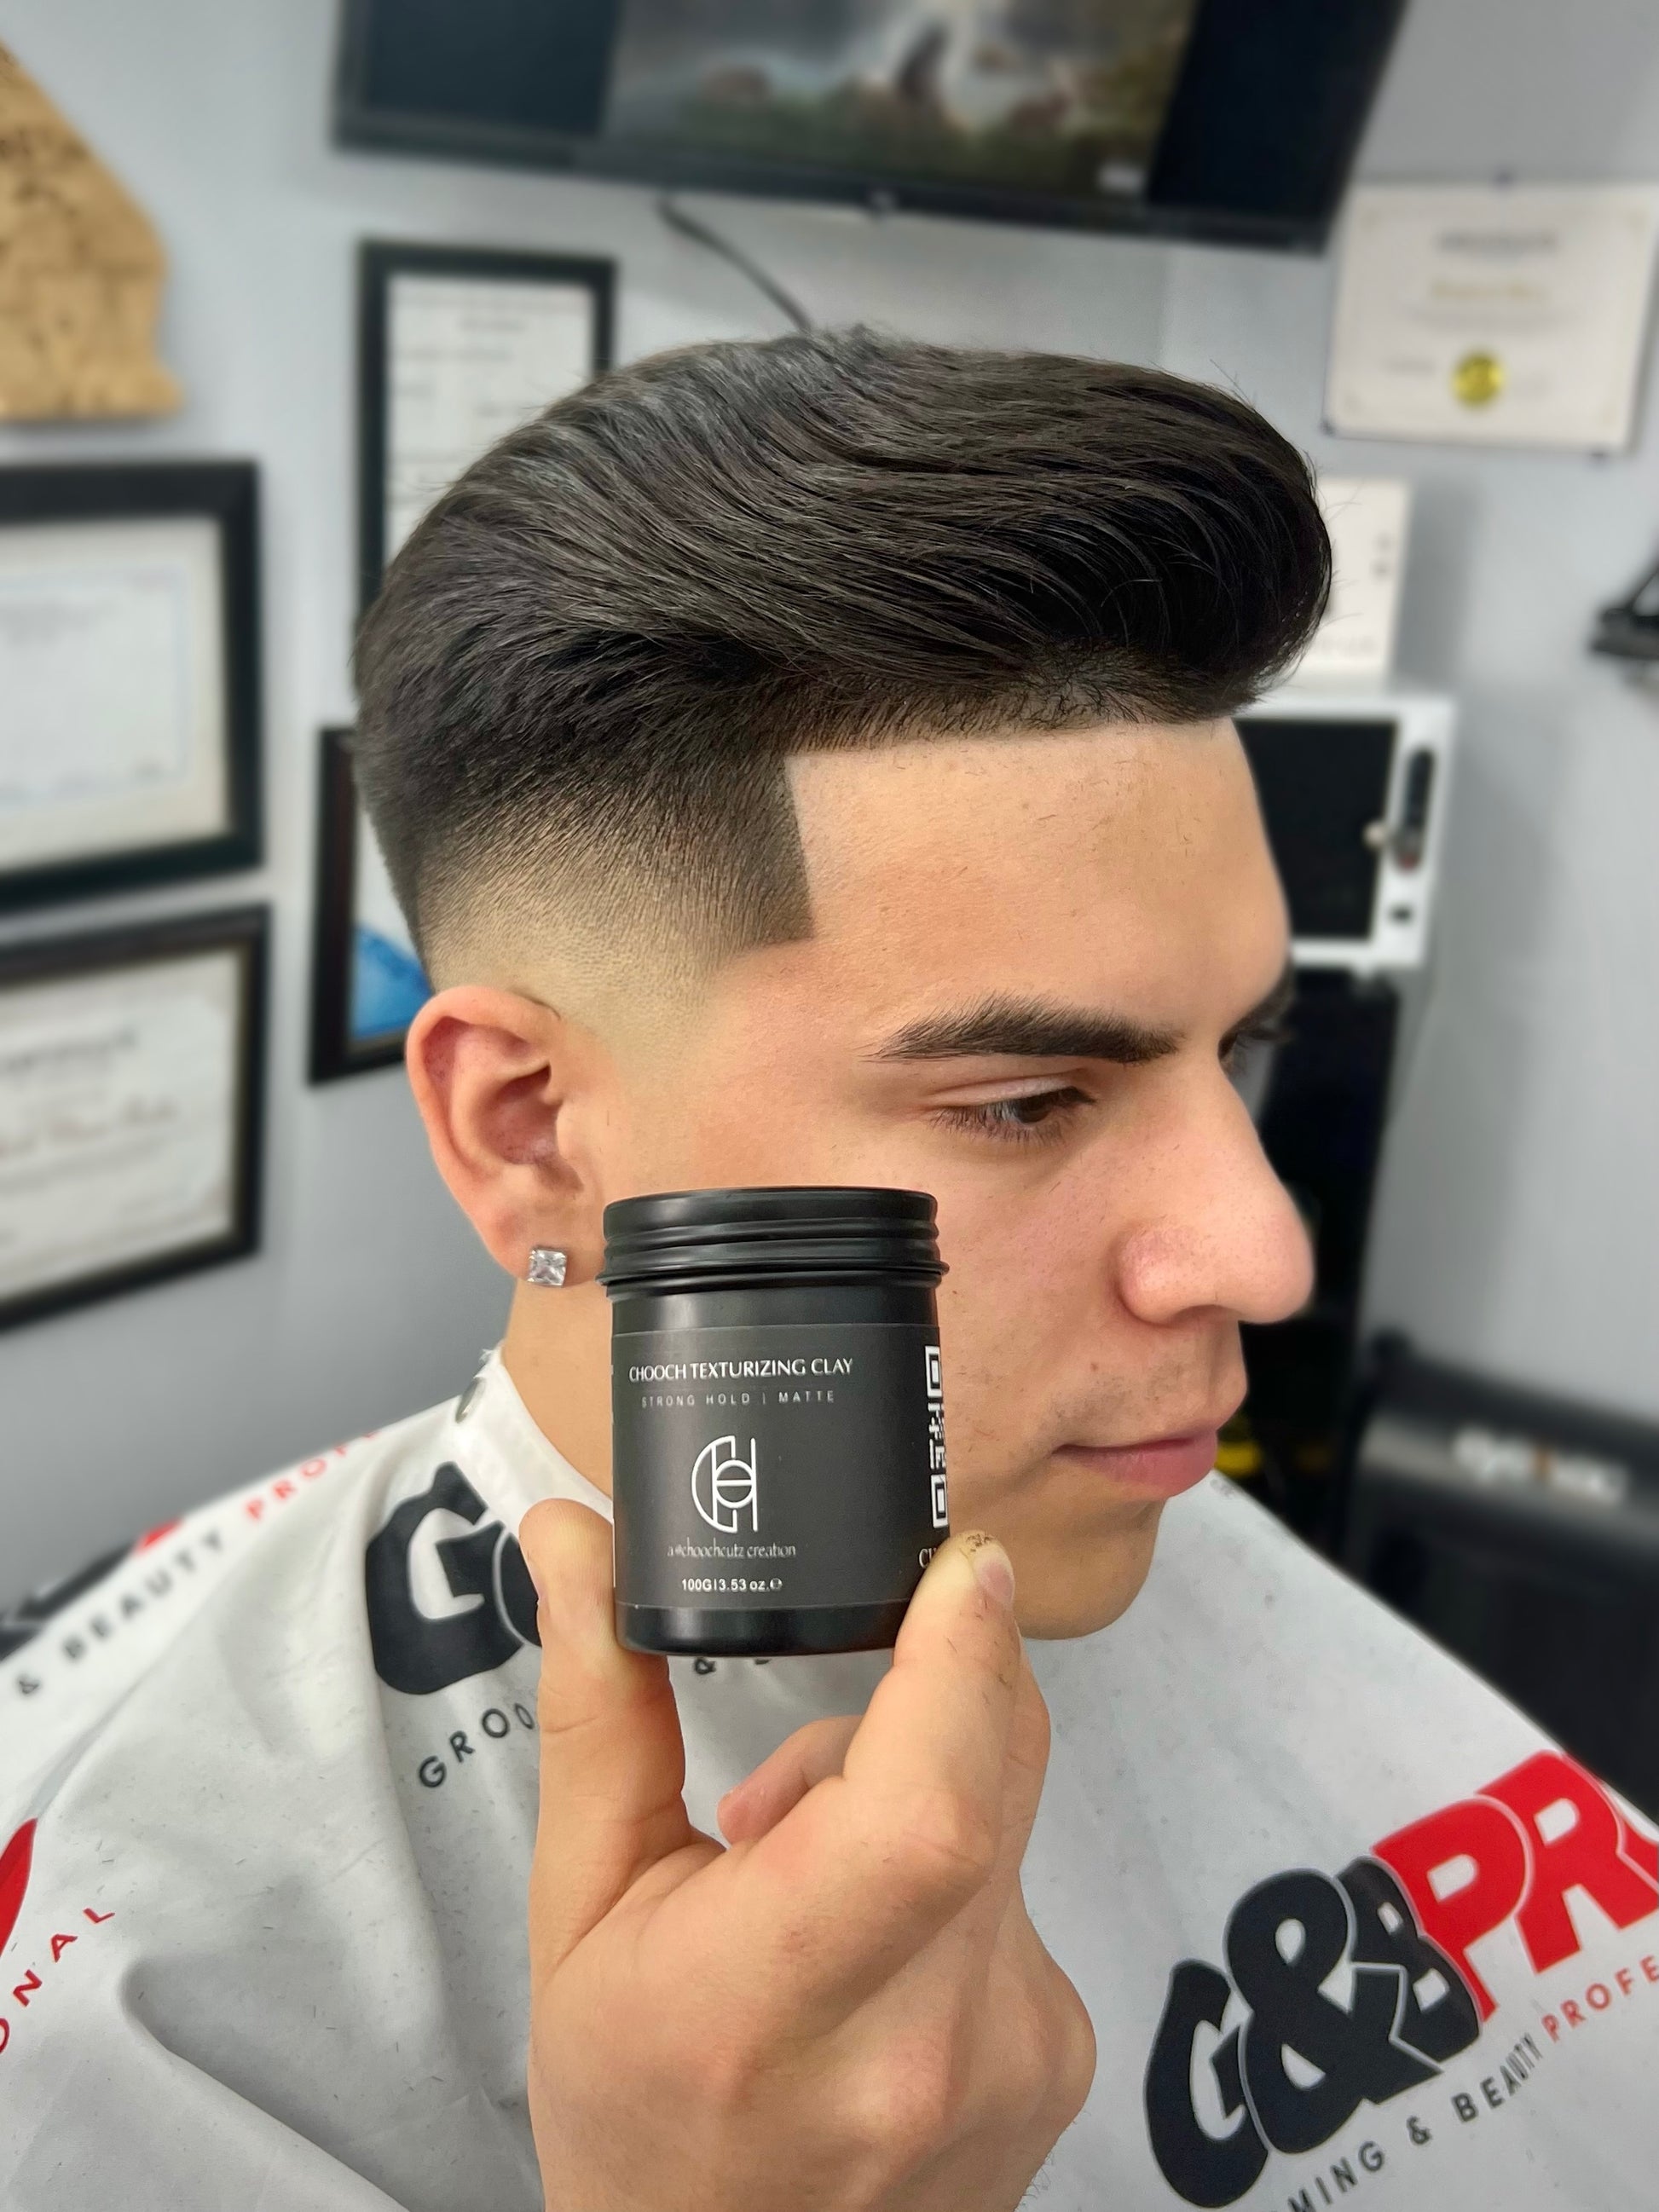 Mid Fade Haircut Combover Styled With Chooch Hair Clay